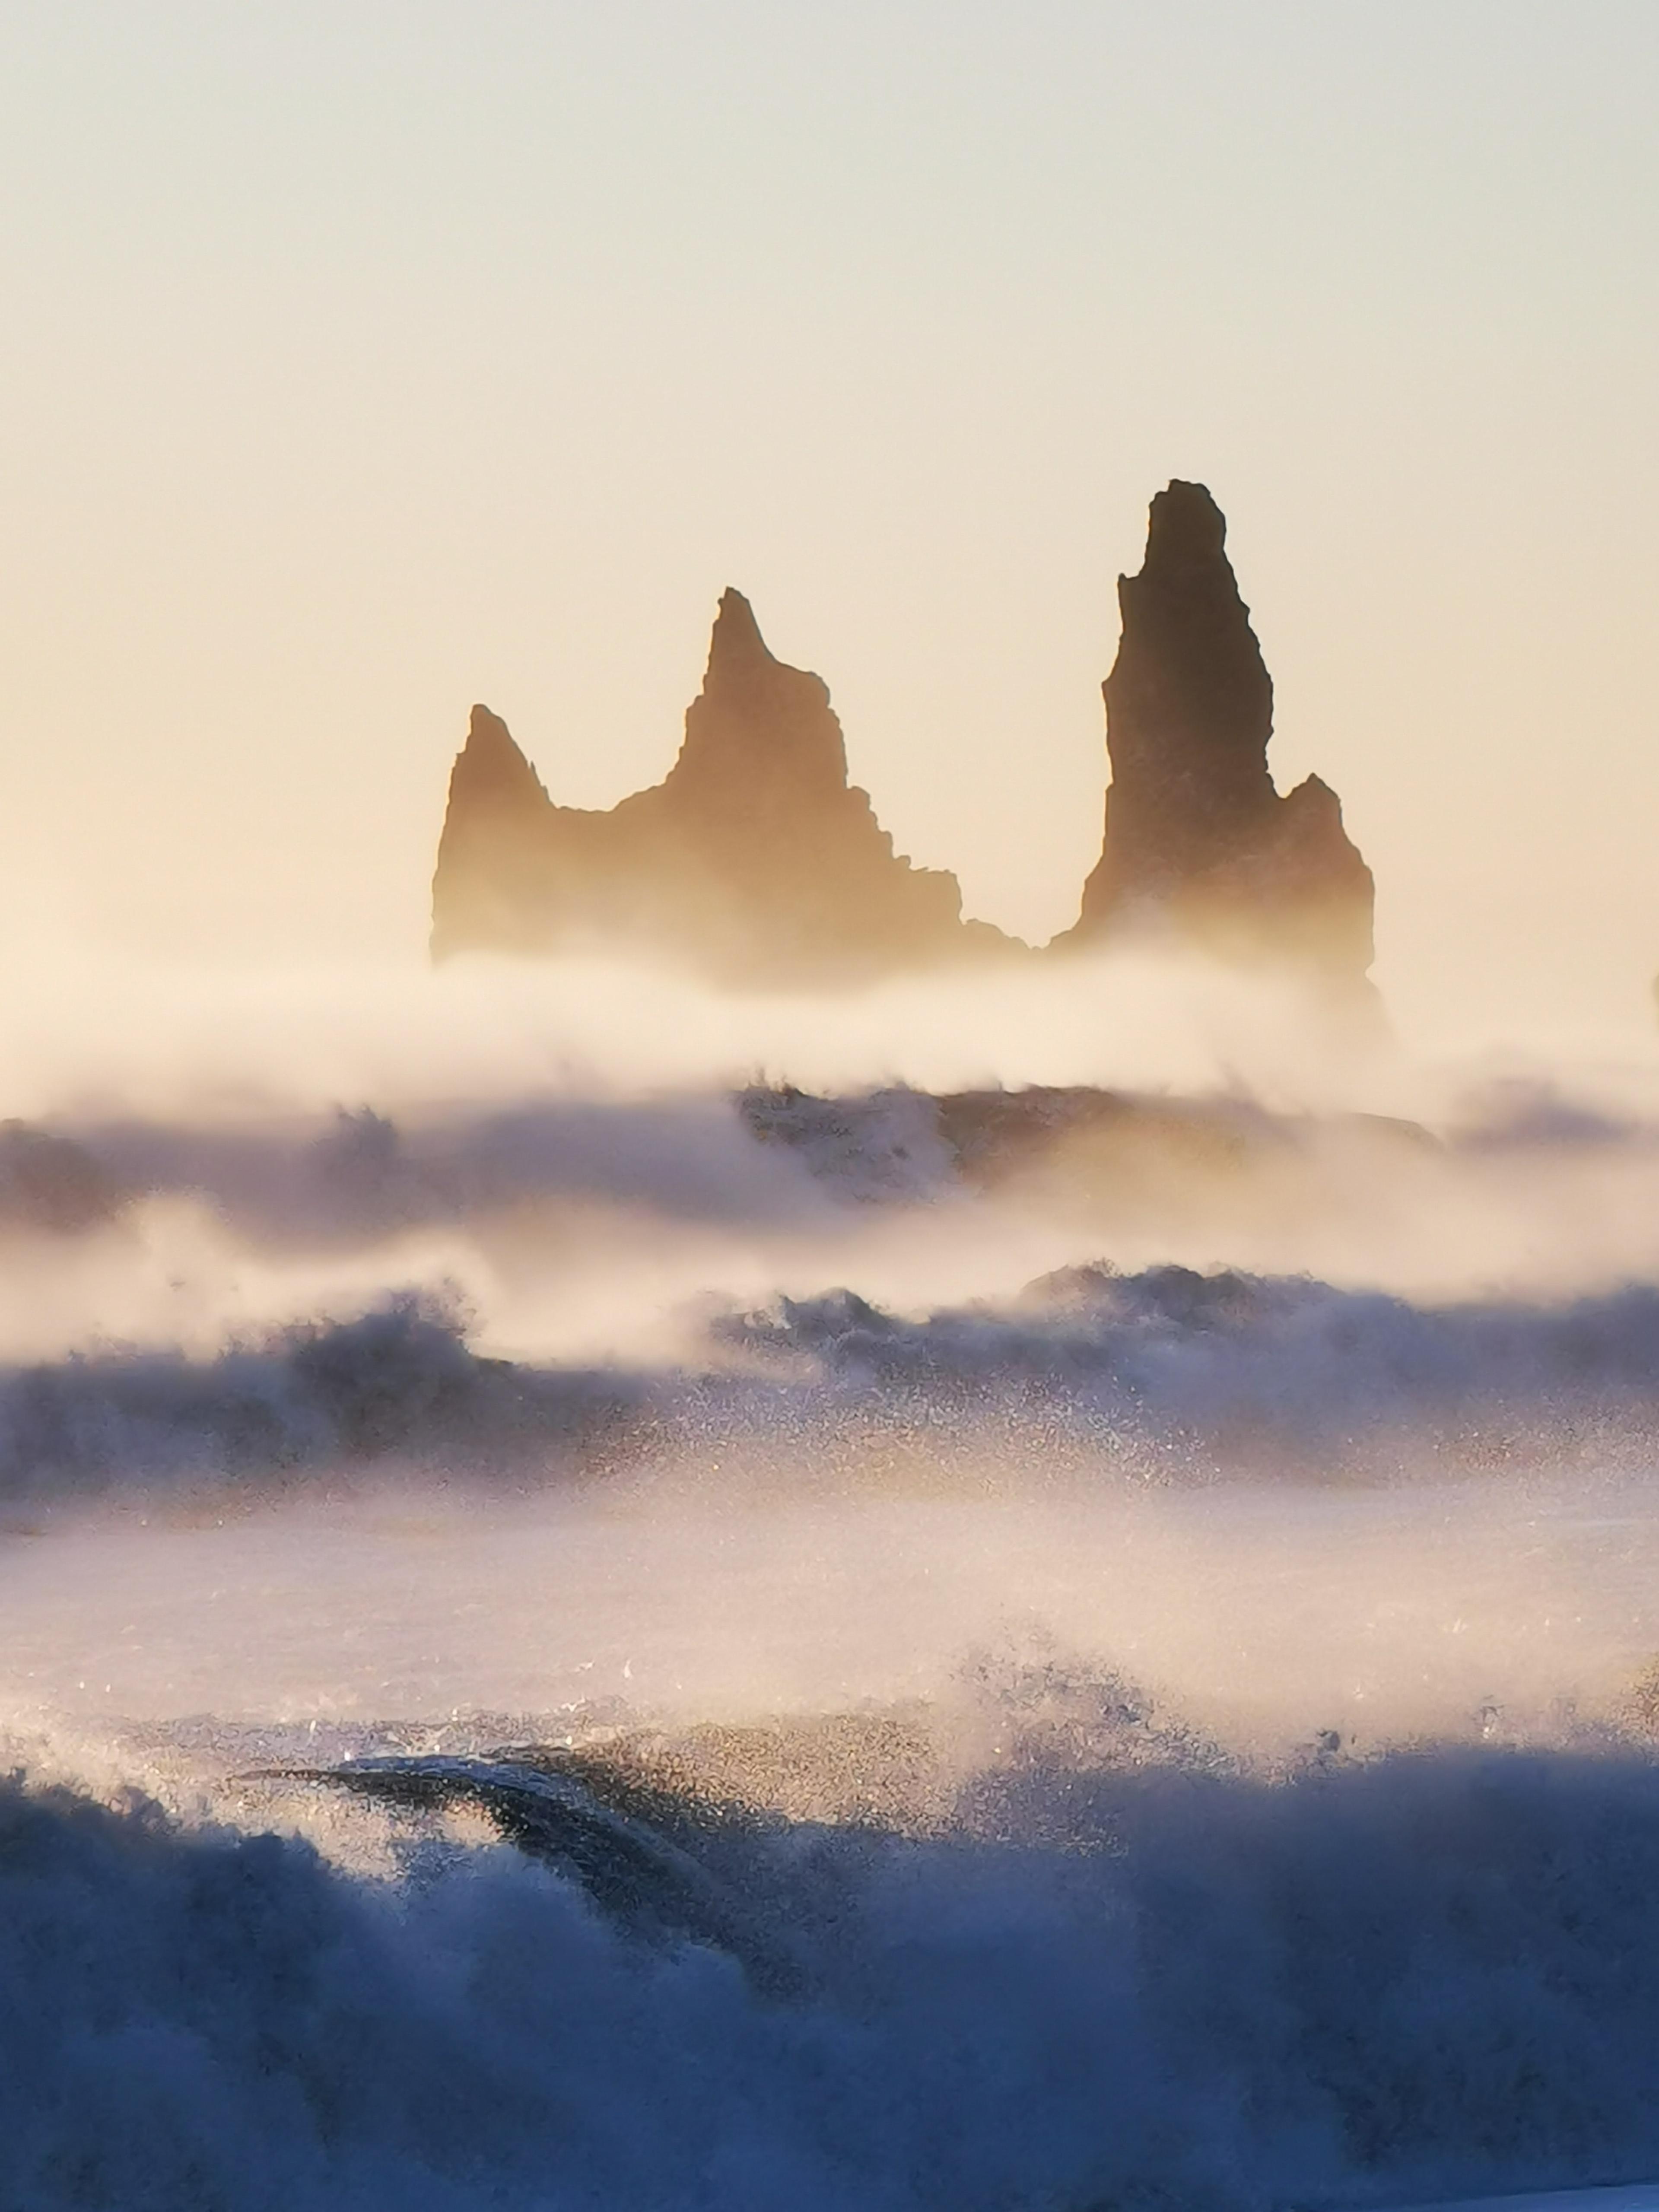 Massive waves crashing onto the black sands of Reynisfjara beach, with the iconic Reynisdrangar sea stacks looming in the misty background.